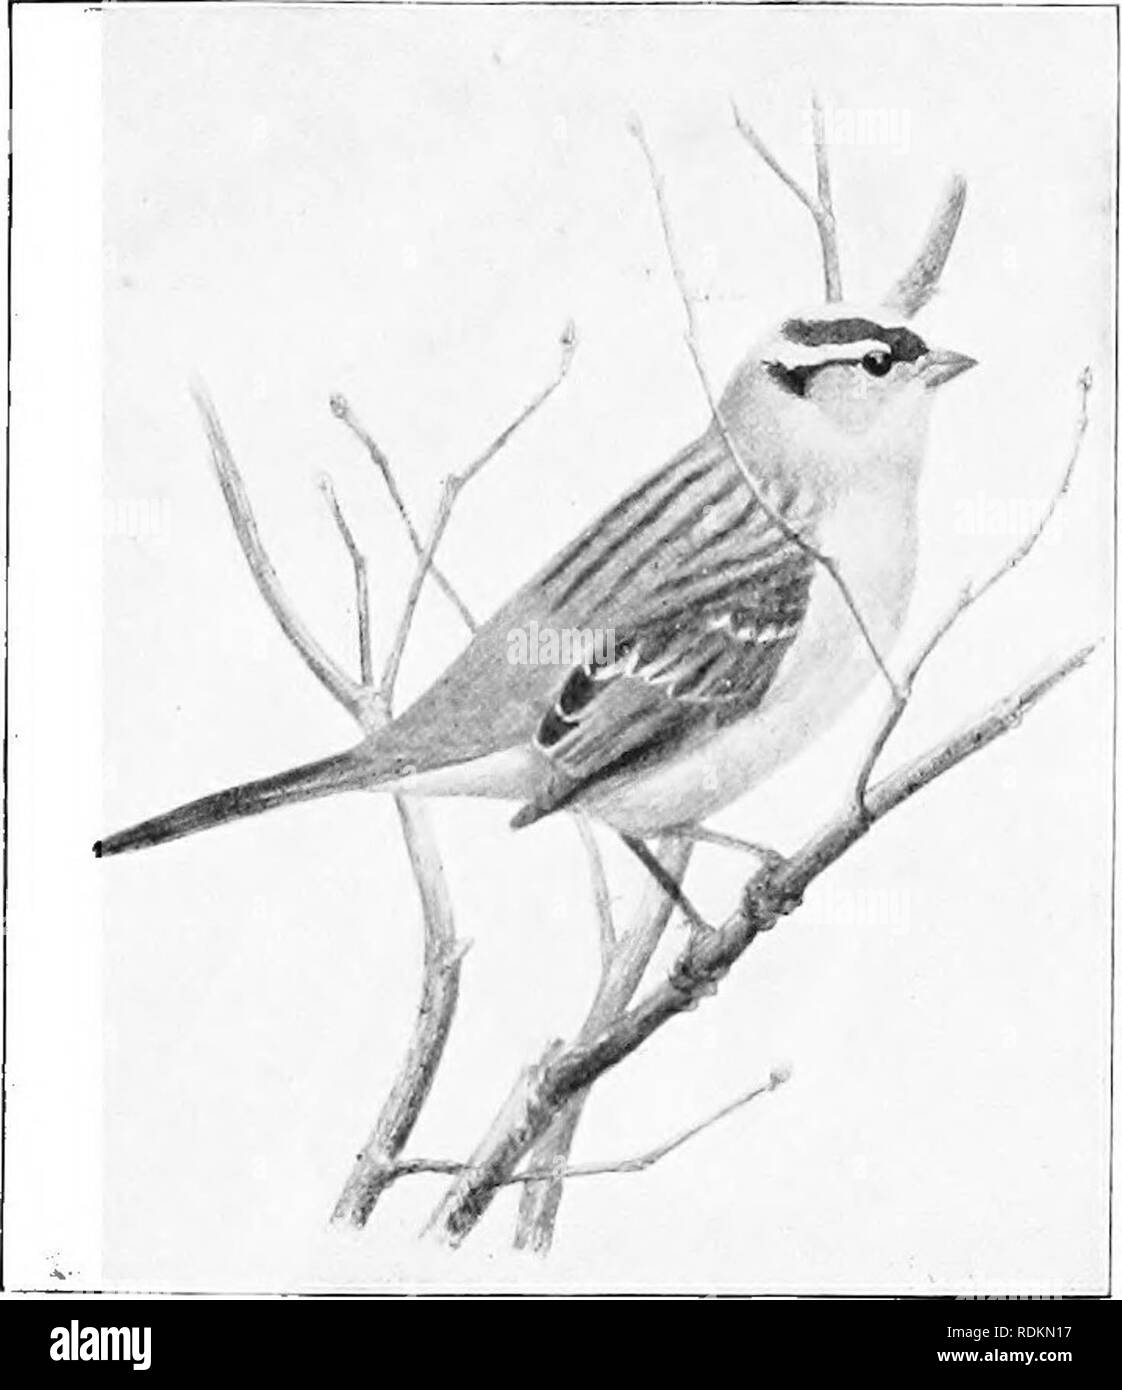 . Results of a biological survey of Mount Shasta, California. Natural history; Natural history. OCT., 1899.] BIRDS. 125 84:. Chondestes grammacus strigatus. Western Lark Sparrow. Not observed on the mountain, but seen at Bdgewood August 31, and in tlie bushes bordering the narrow meadows on Shasta liiver, in the southwestern part of Shasta Valley, September 29. Ten days ear- lier W. U. Osgood reported them as common a little farther north in Shasta Valley. At Sisson E. T. Fisher saw two Hocks the first half of September. In August, 1883, 0. H. Townsend found the species abun- dant &quot;on the Stock Photo